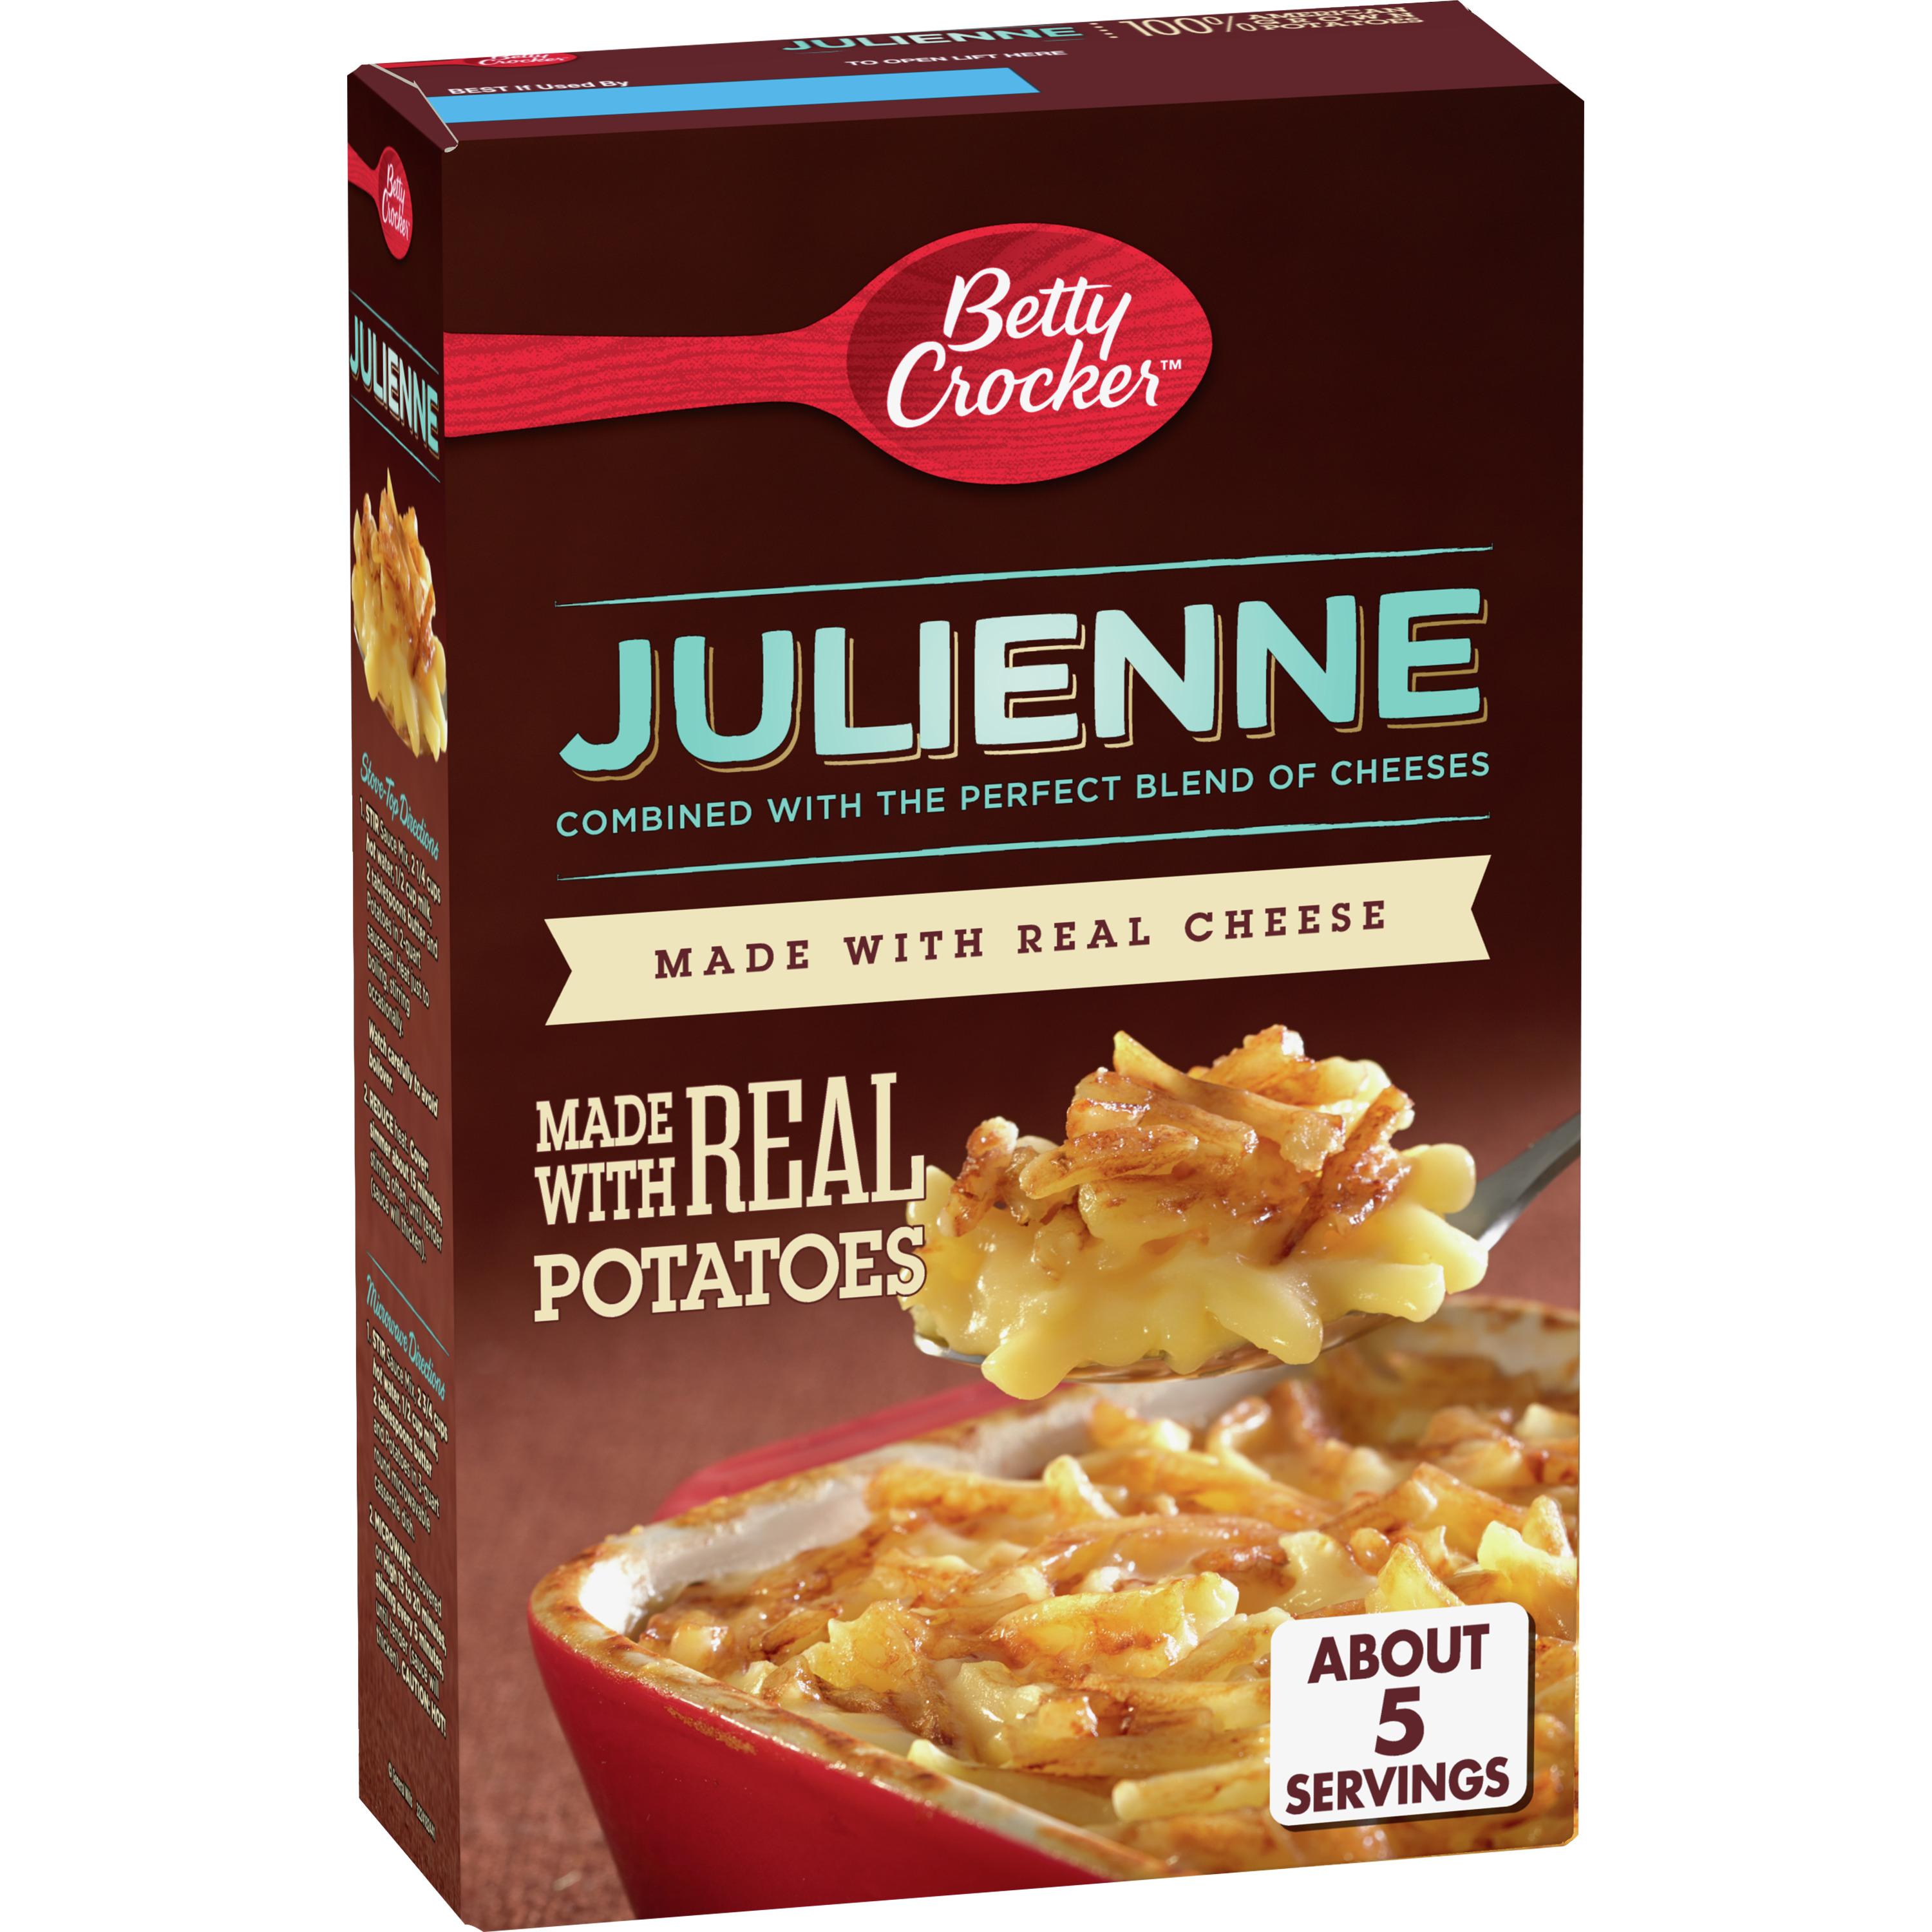 Betty Crocker Julienne Potatoes, Made with Real Cheese, 4.6 oz. - image 1 of 10